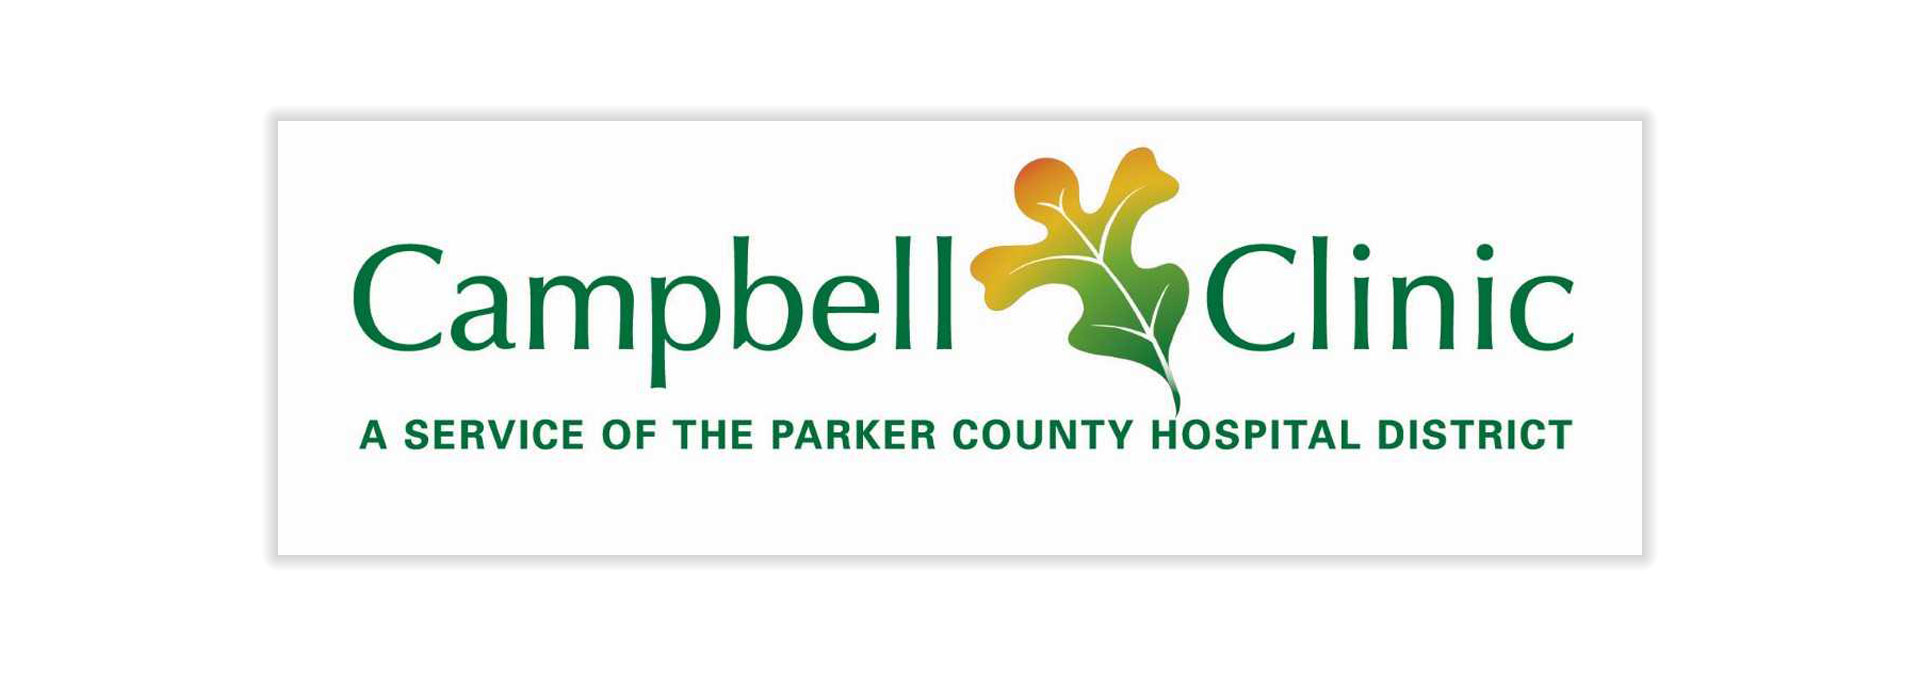 Campbell Clinic
A SERVICE OF THE PARKER COUNTY HOSPITAL DISTRICT